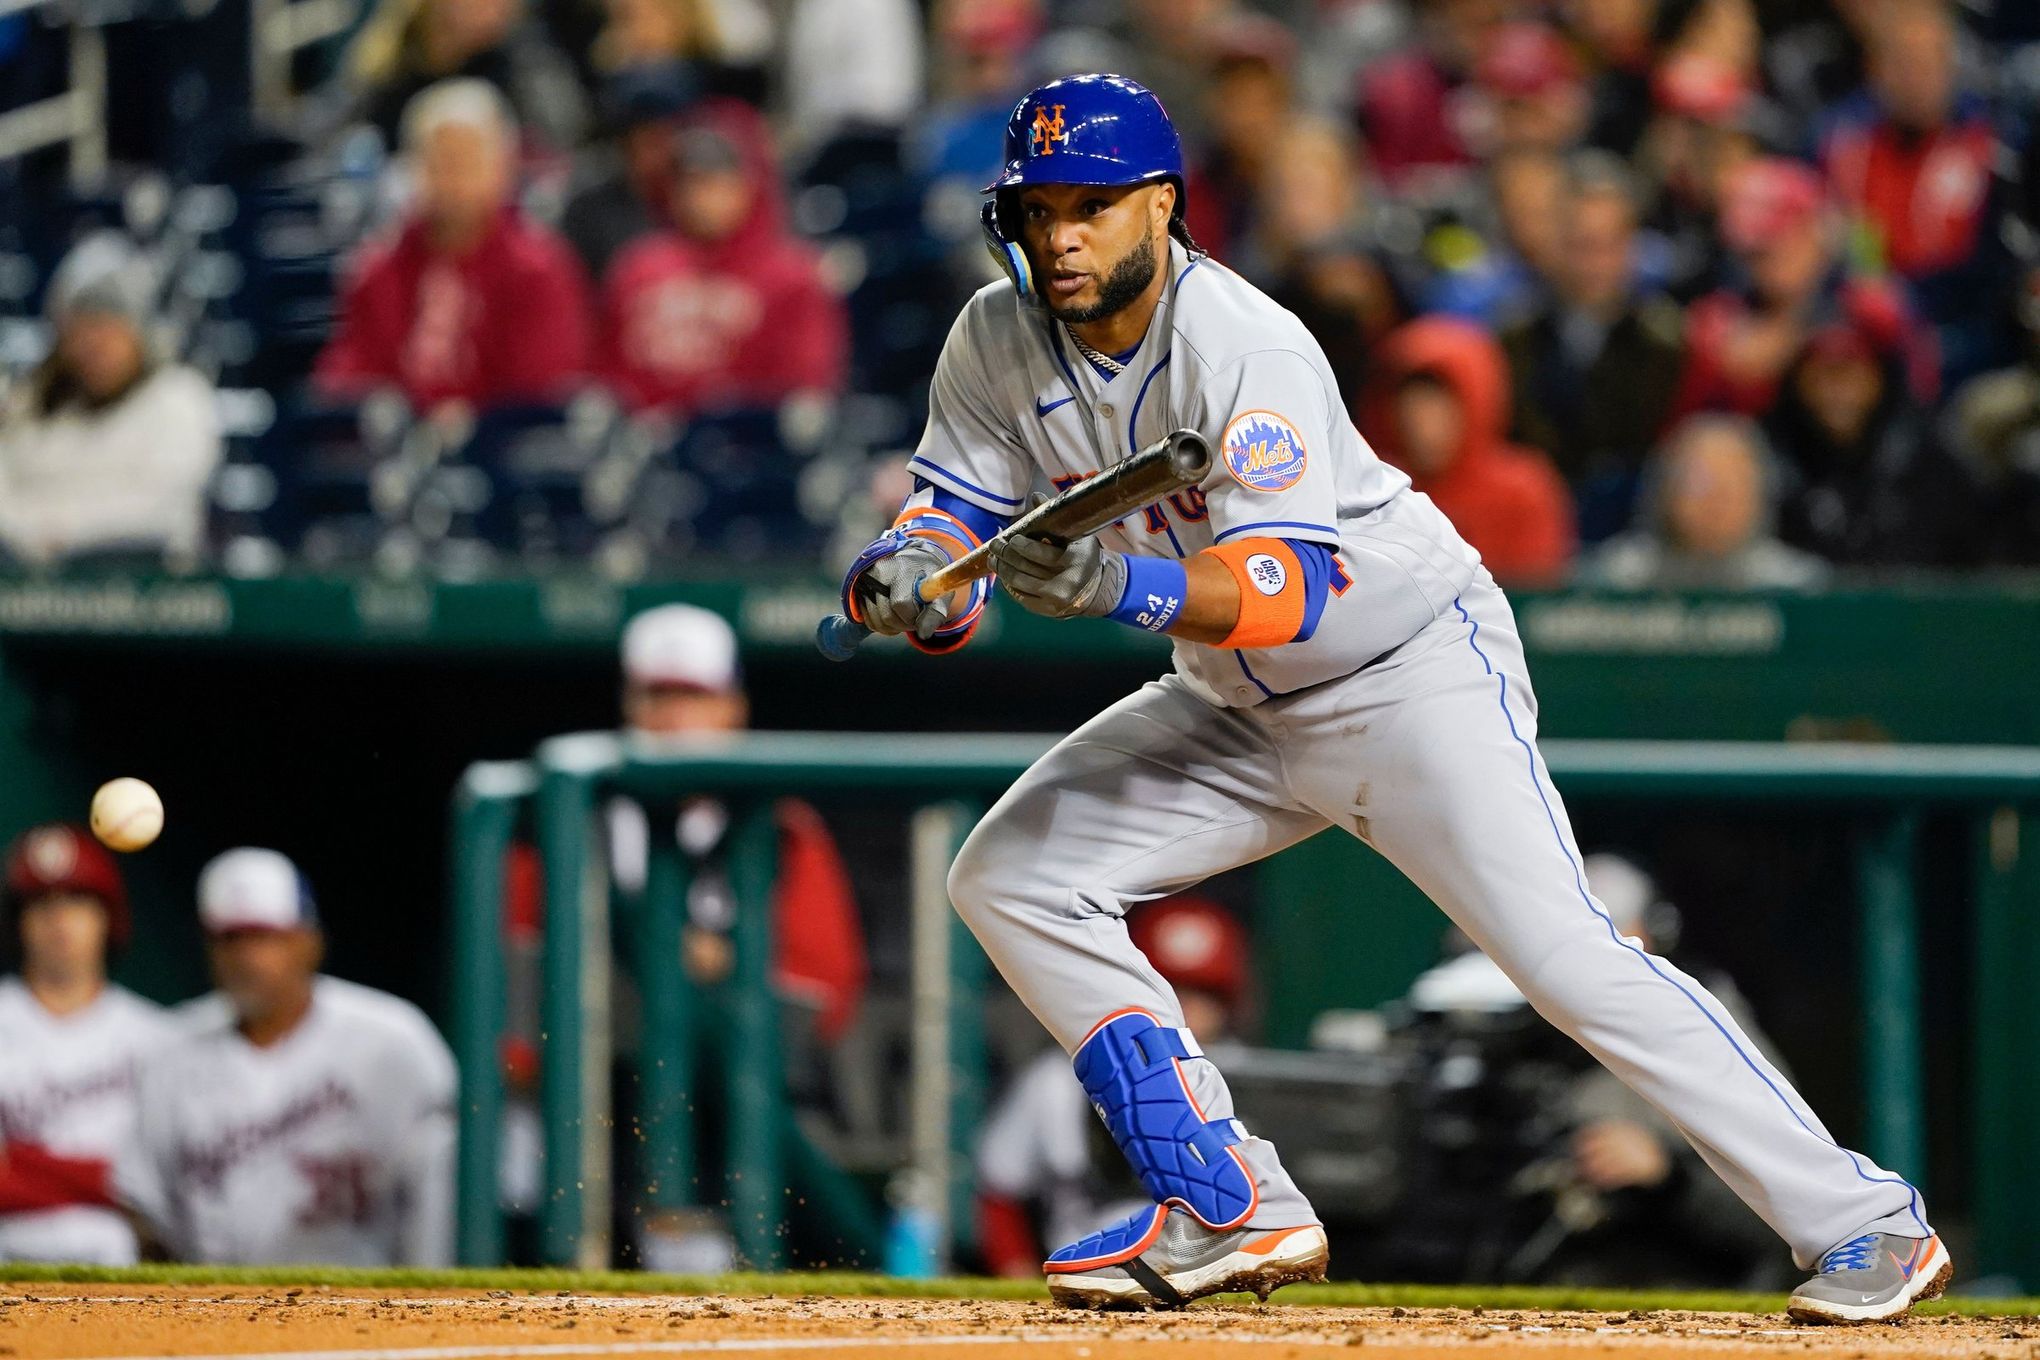 Robinson Cano's MLB career could be over at the Mets